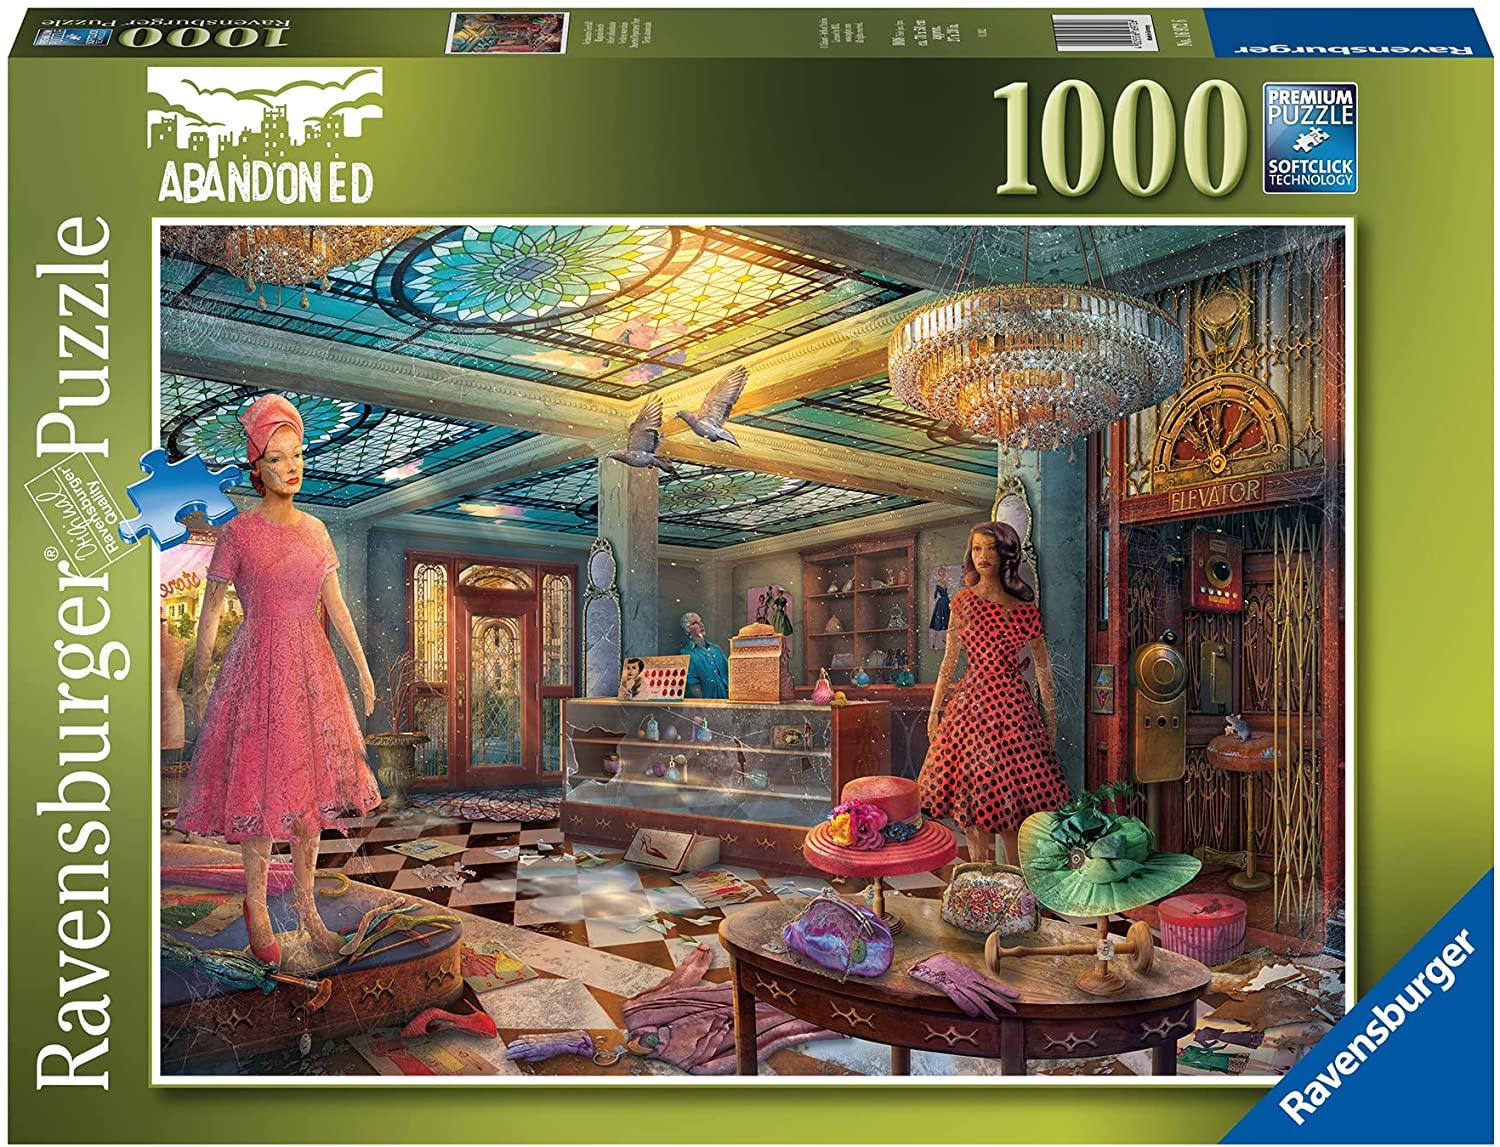 Ravensburger Deserted Department Store Jigsaw Puzzle (1000 Pieces)